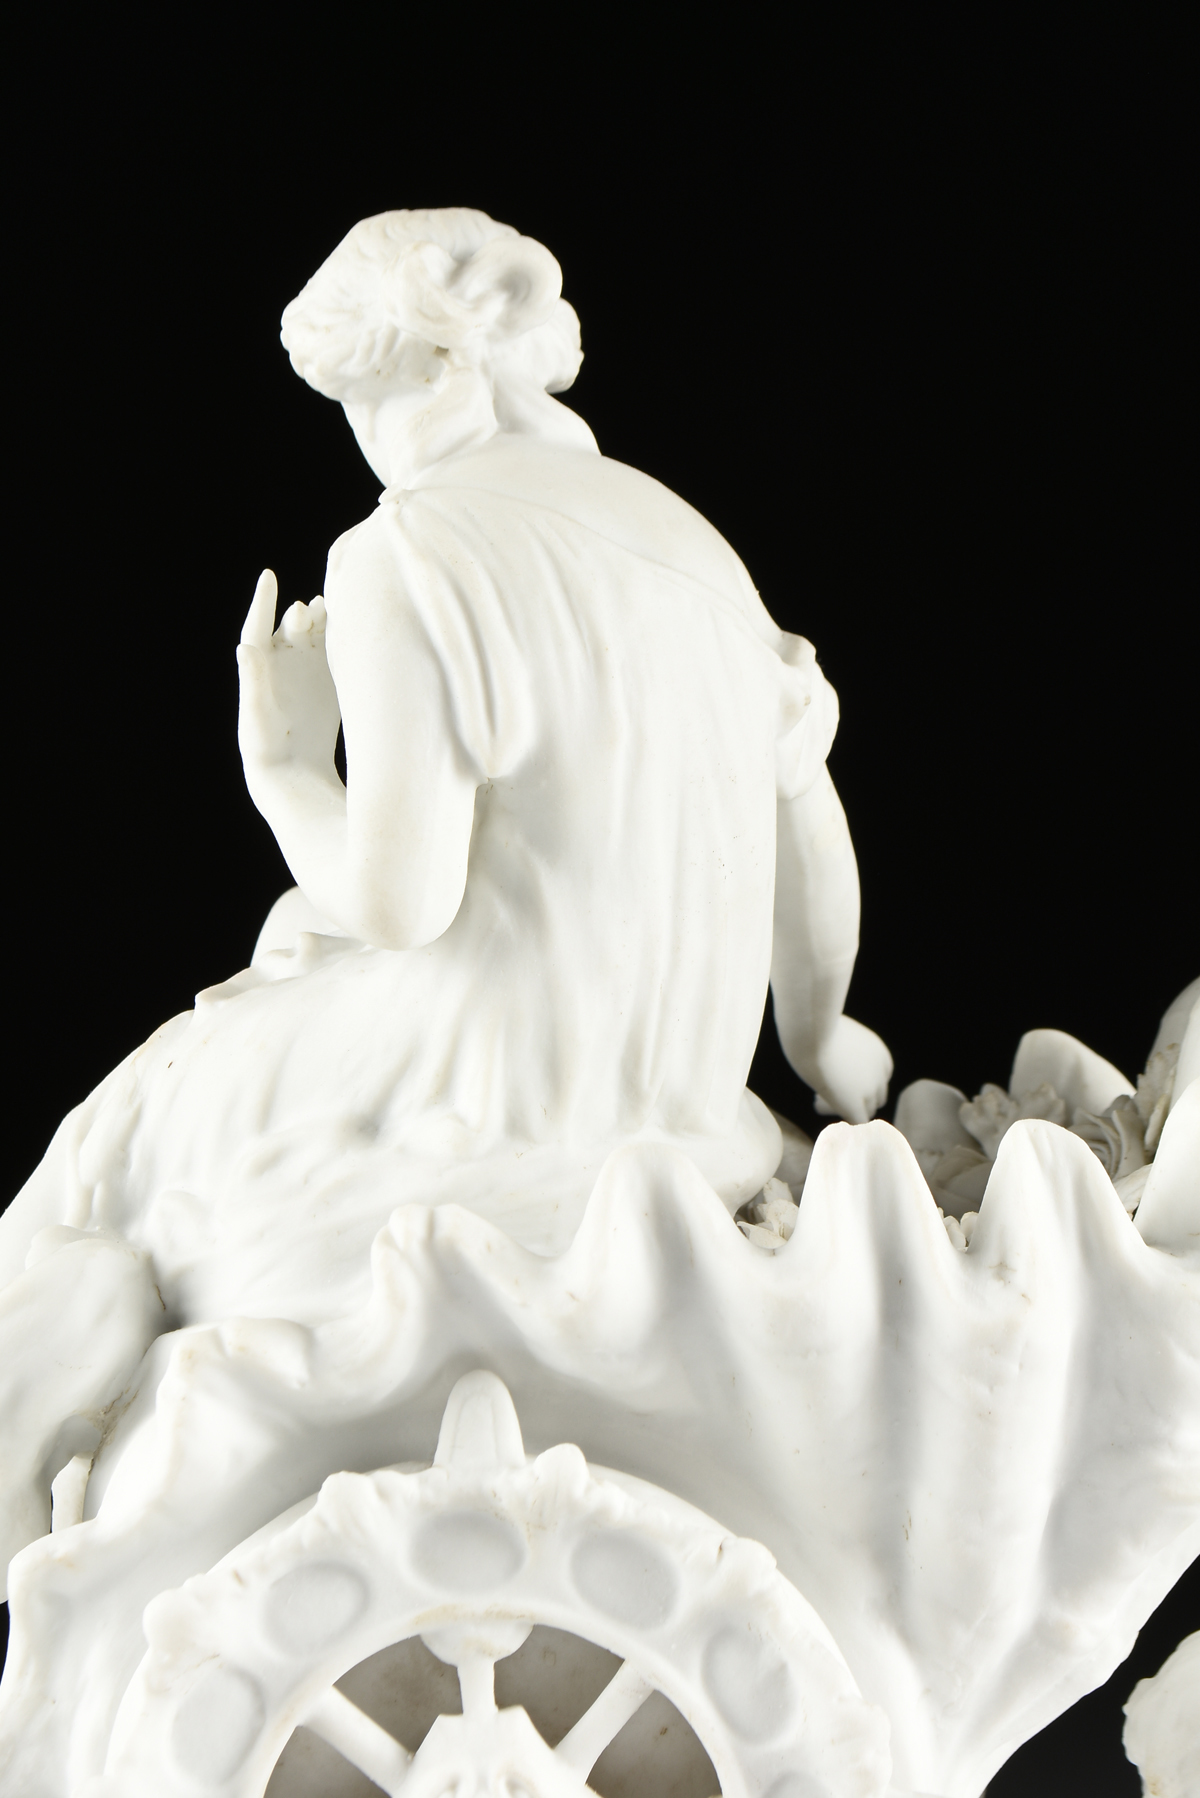 A BAROQUE REVIVAL BISQUE PORCELAIN FIGURAL GROUPING, "Allegory of Spring," POSSIBLY GERMAN, LATE - Image 7 of 11